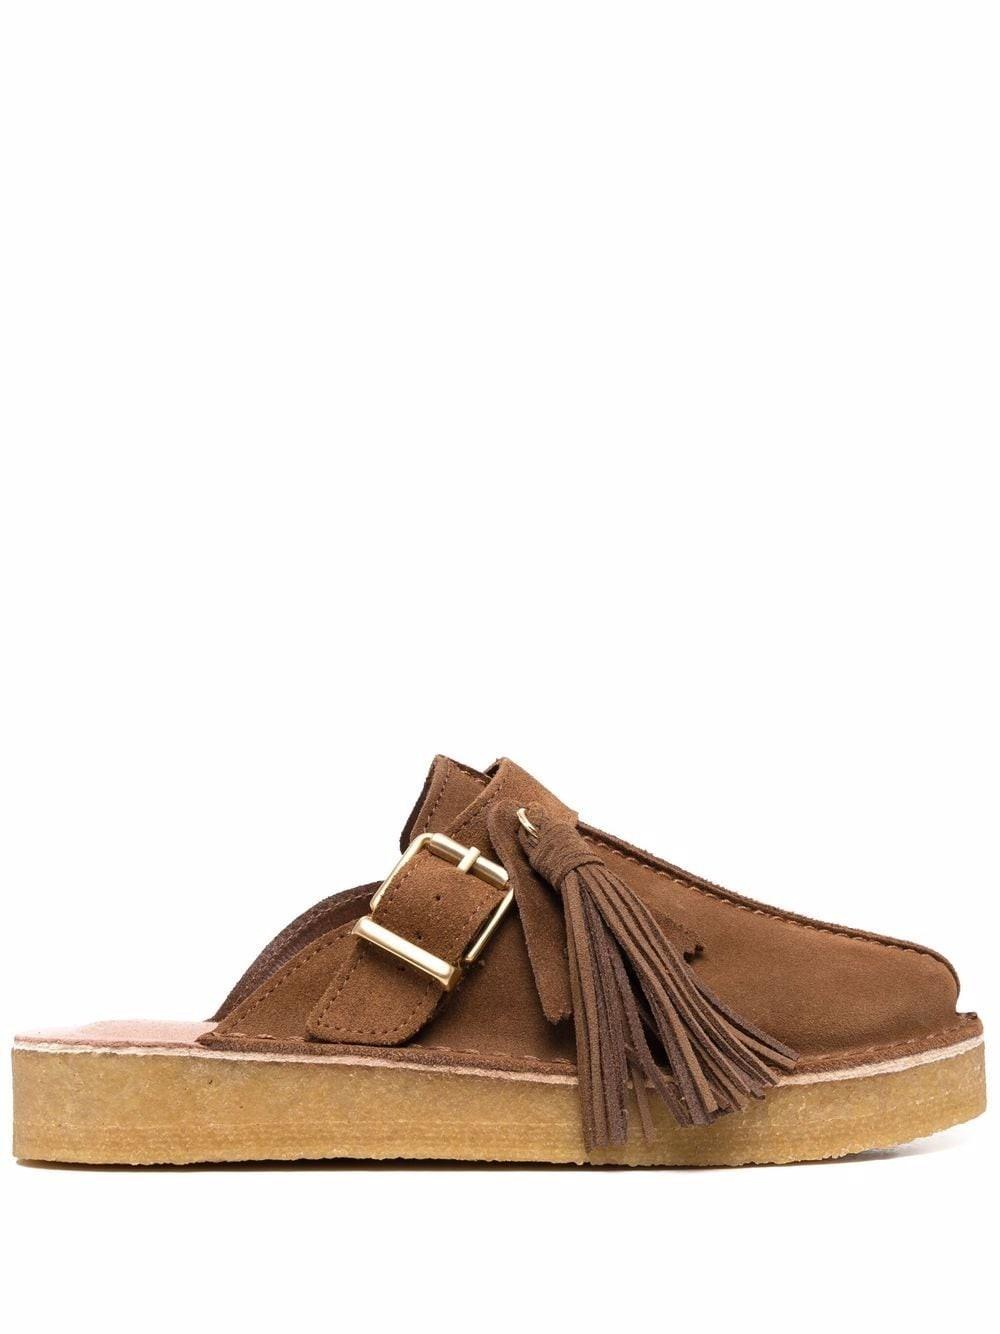 Clarks Sandals Shoes Brown |